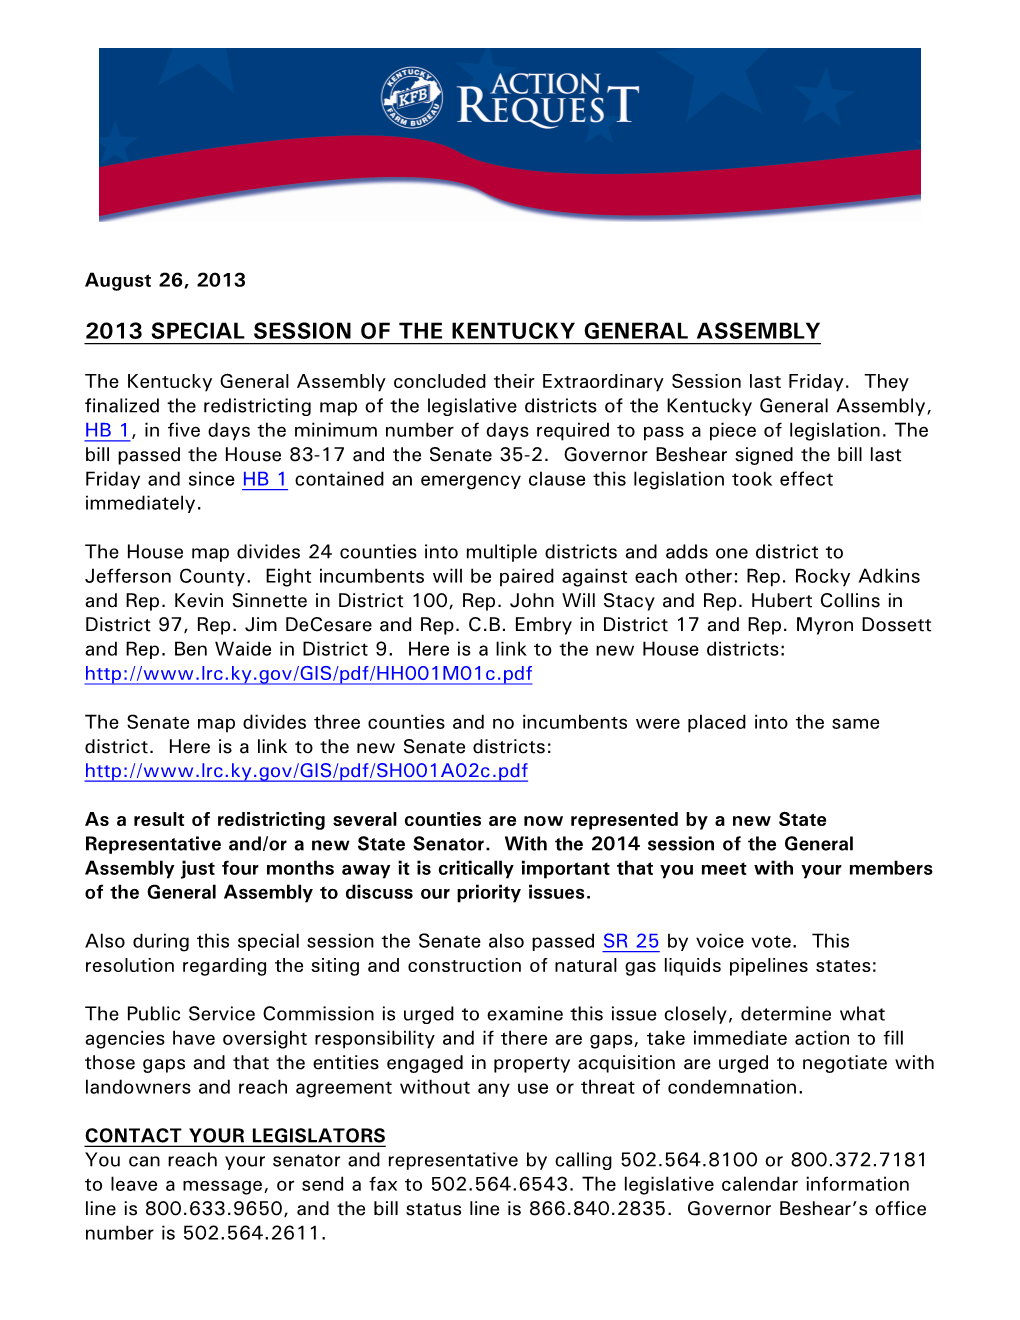 2013 Special Session of the Kentucky General Assembly